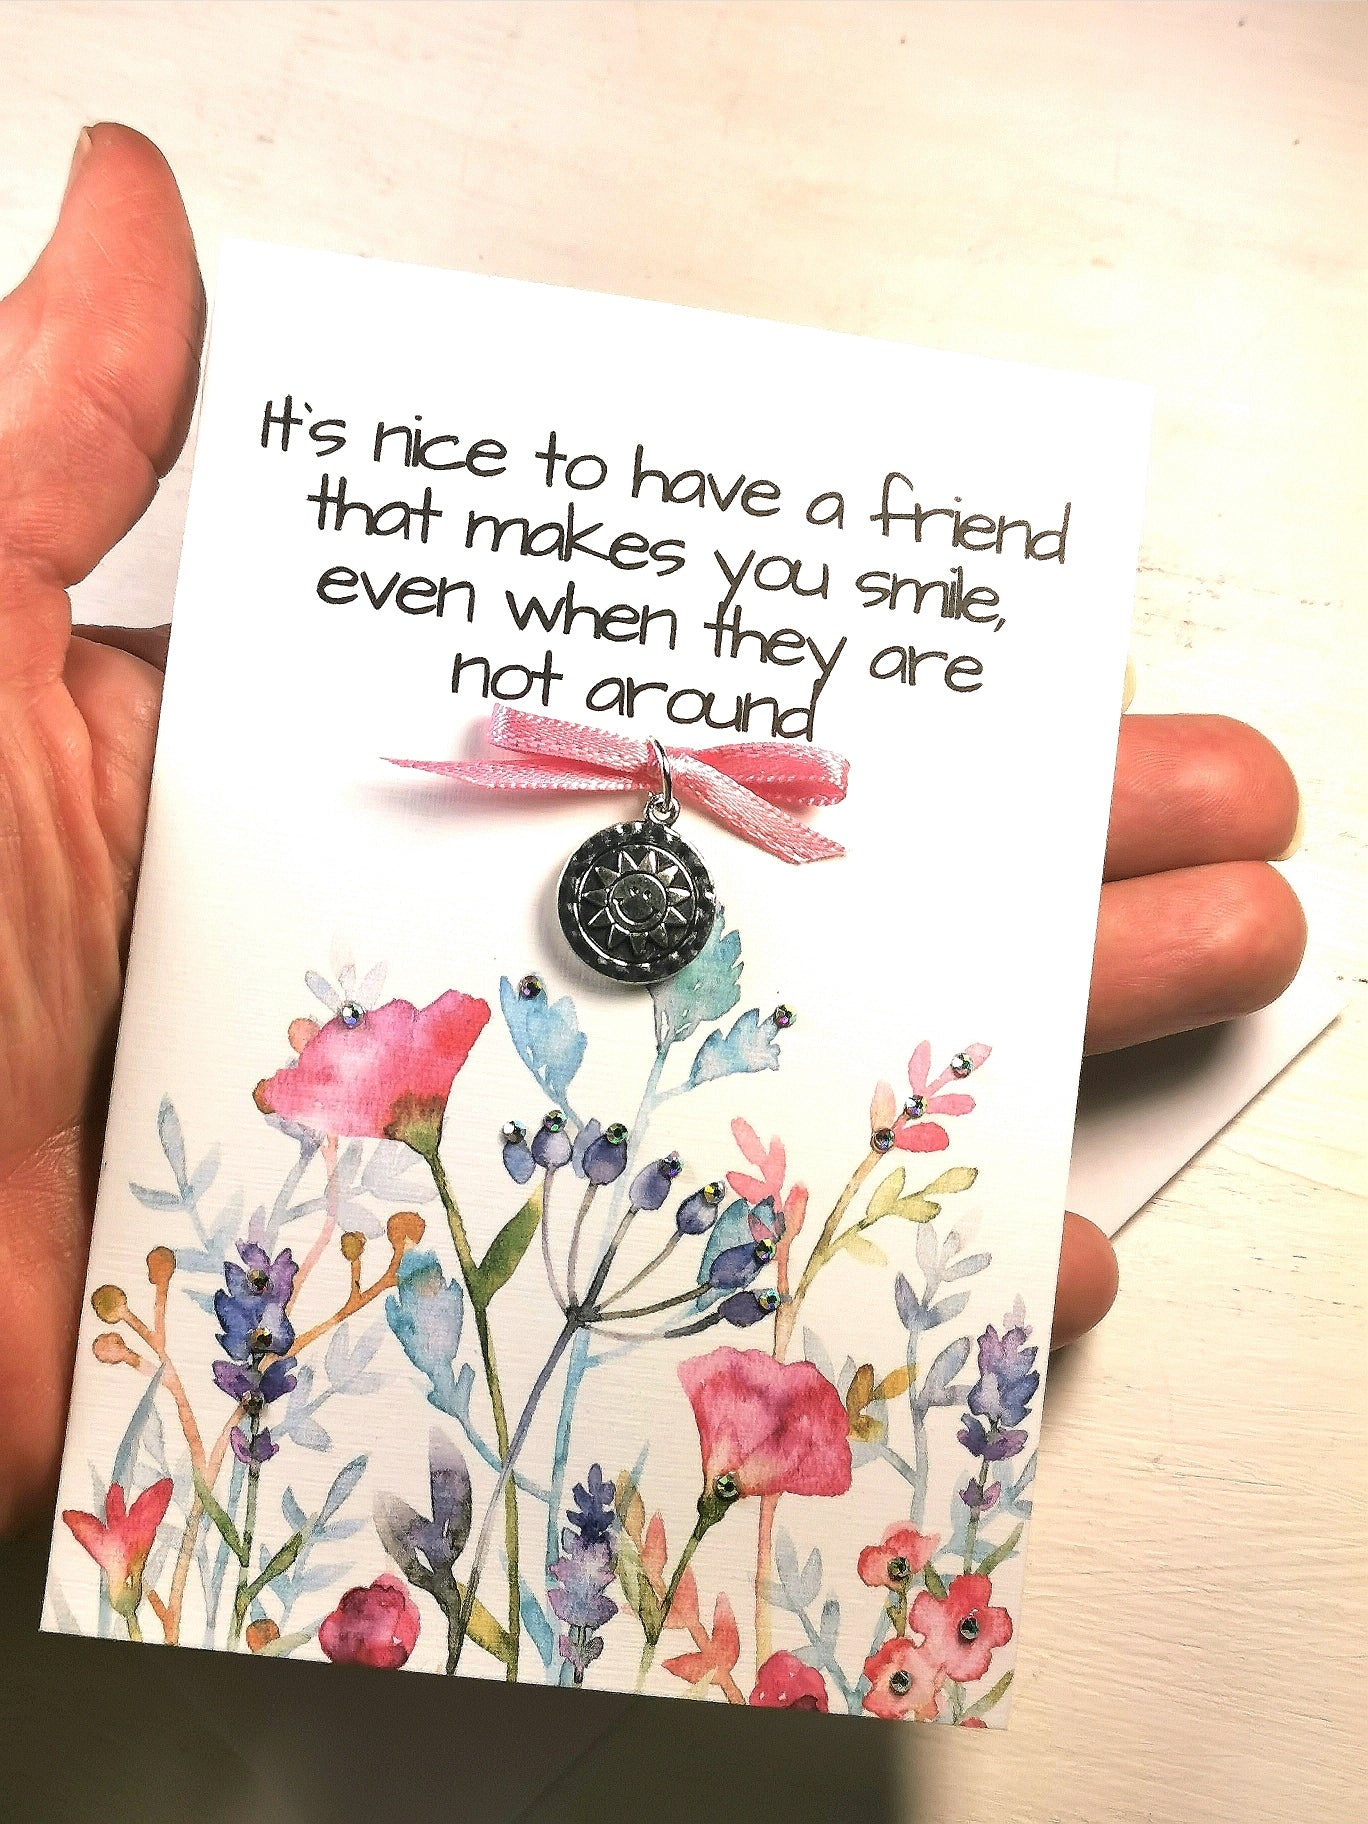 Girlfriends that make you Smile charm | Card Friendship Charm gift Card | Girlfriends Birthday card | Friendship Smile charm | Friendship flower